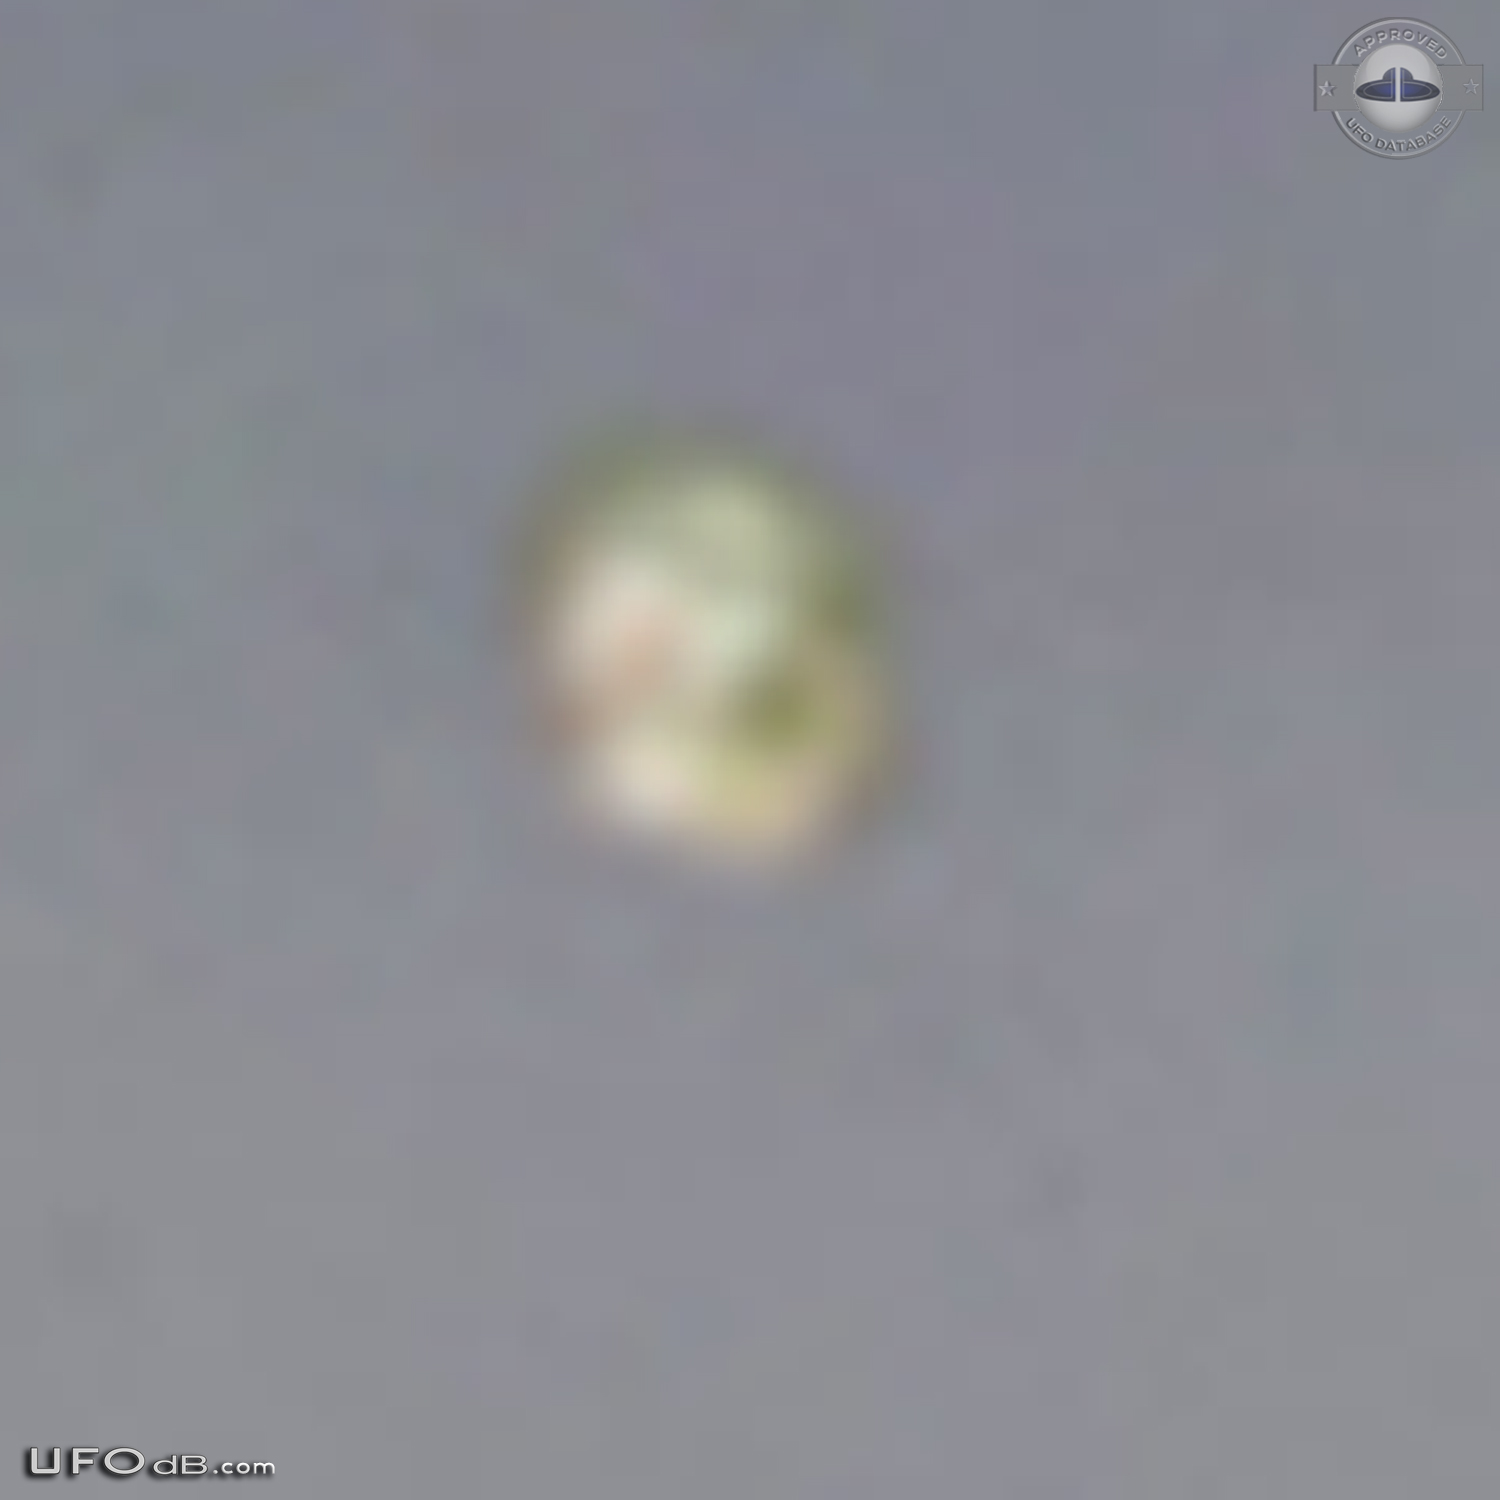 Two UFOs near Tango 01 the airplane of the Argentina president in 2012 UFO Picture #574-5